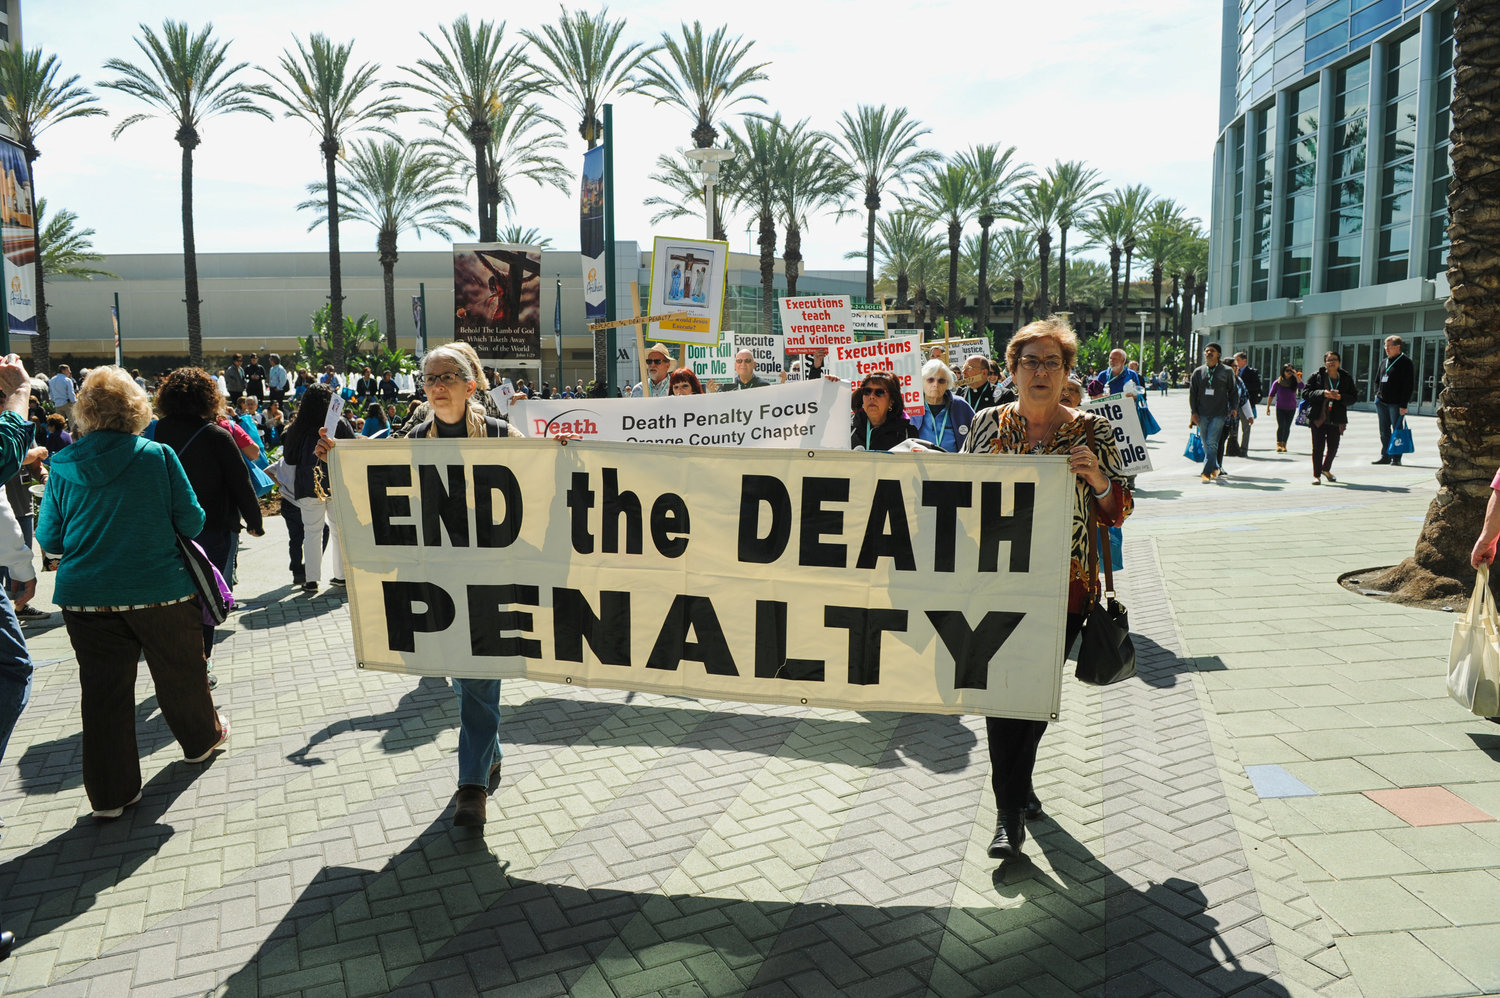 Demonstrators march through a courtyard to protest the death penalty during a rally organized by “Catholics Against the Death Penalty-Southern California” in Anaheim Feb. 25, 2017. On May 30, 2019, New Hampshire became the 21st state to ban capital after lawmakers garnered enough votes to override Gov. Chris Sununu’s veto of a bill to repeal the death penalty in the state.